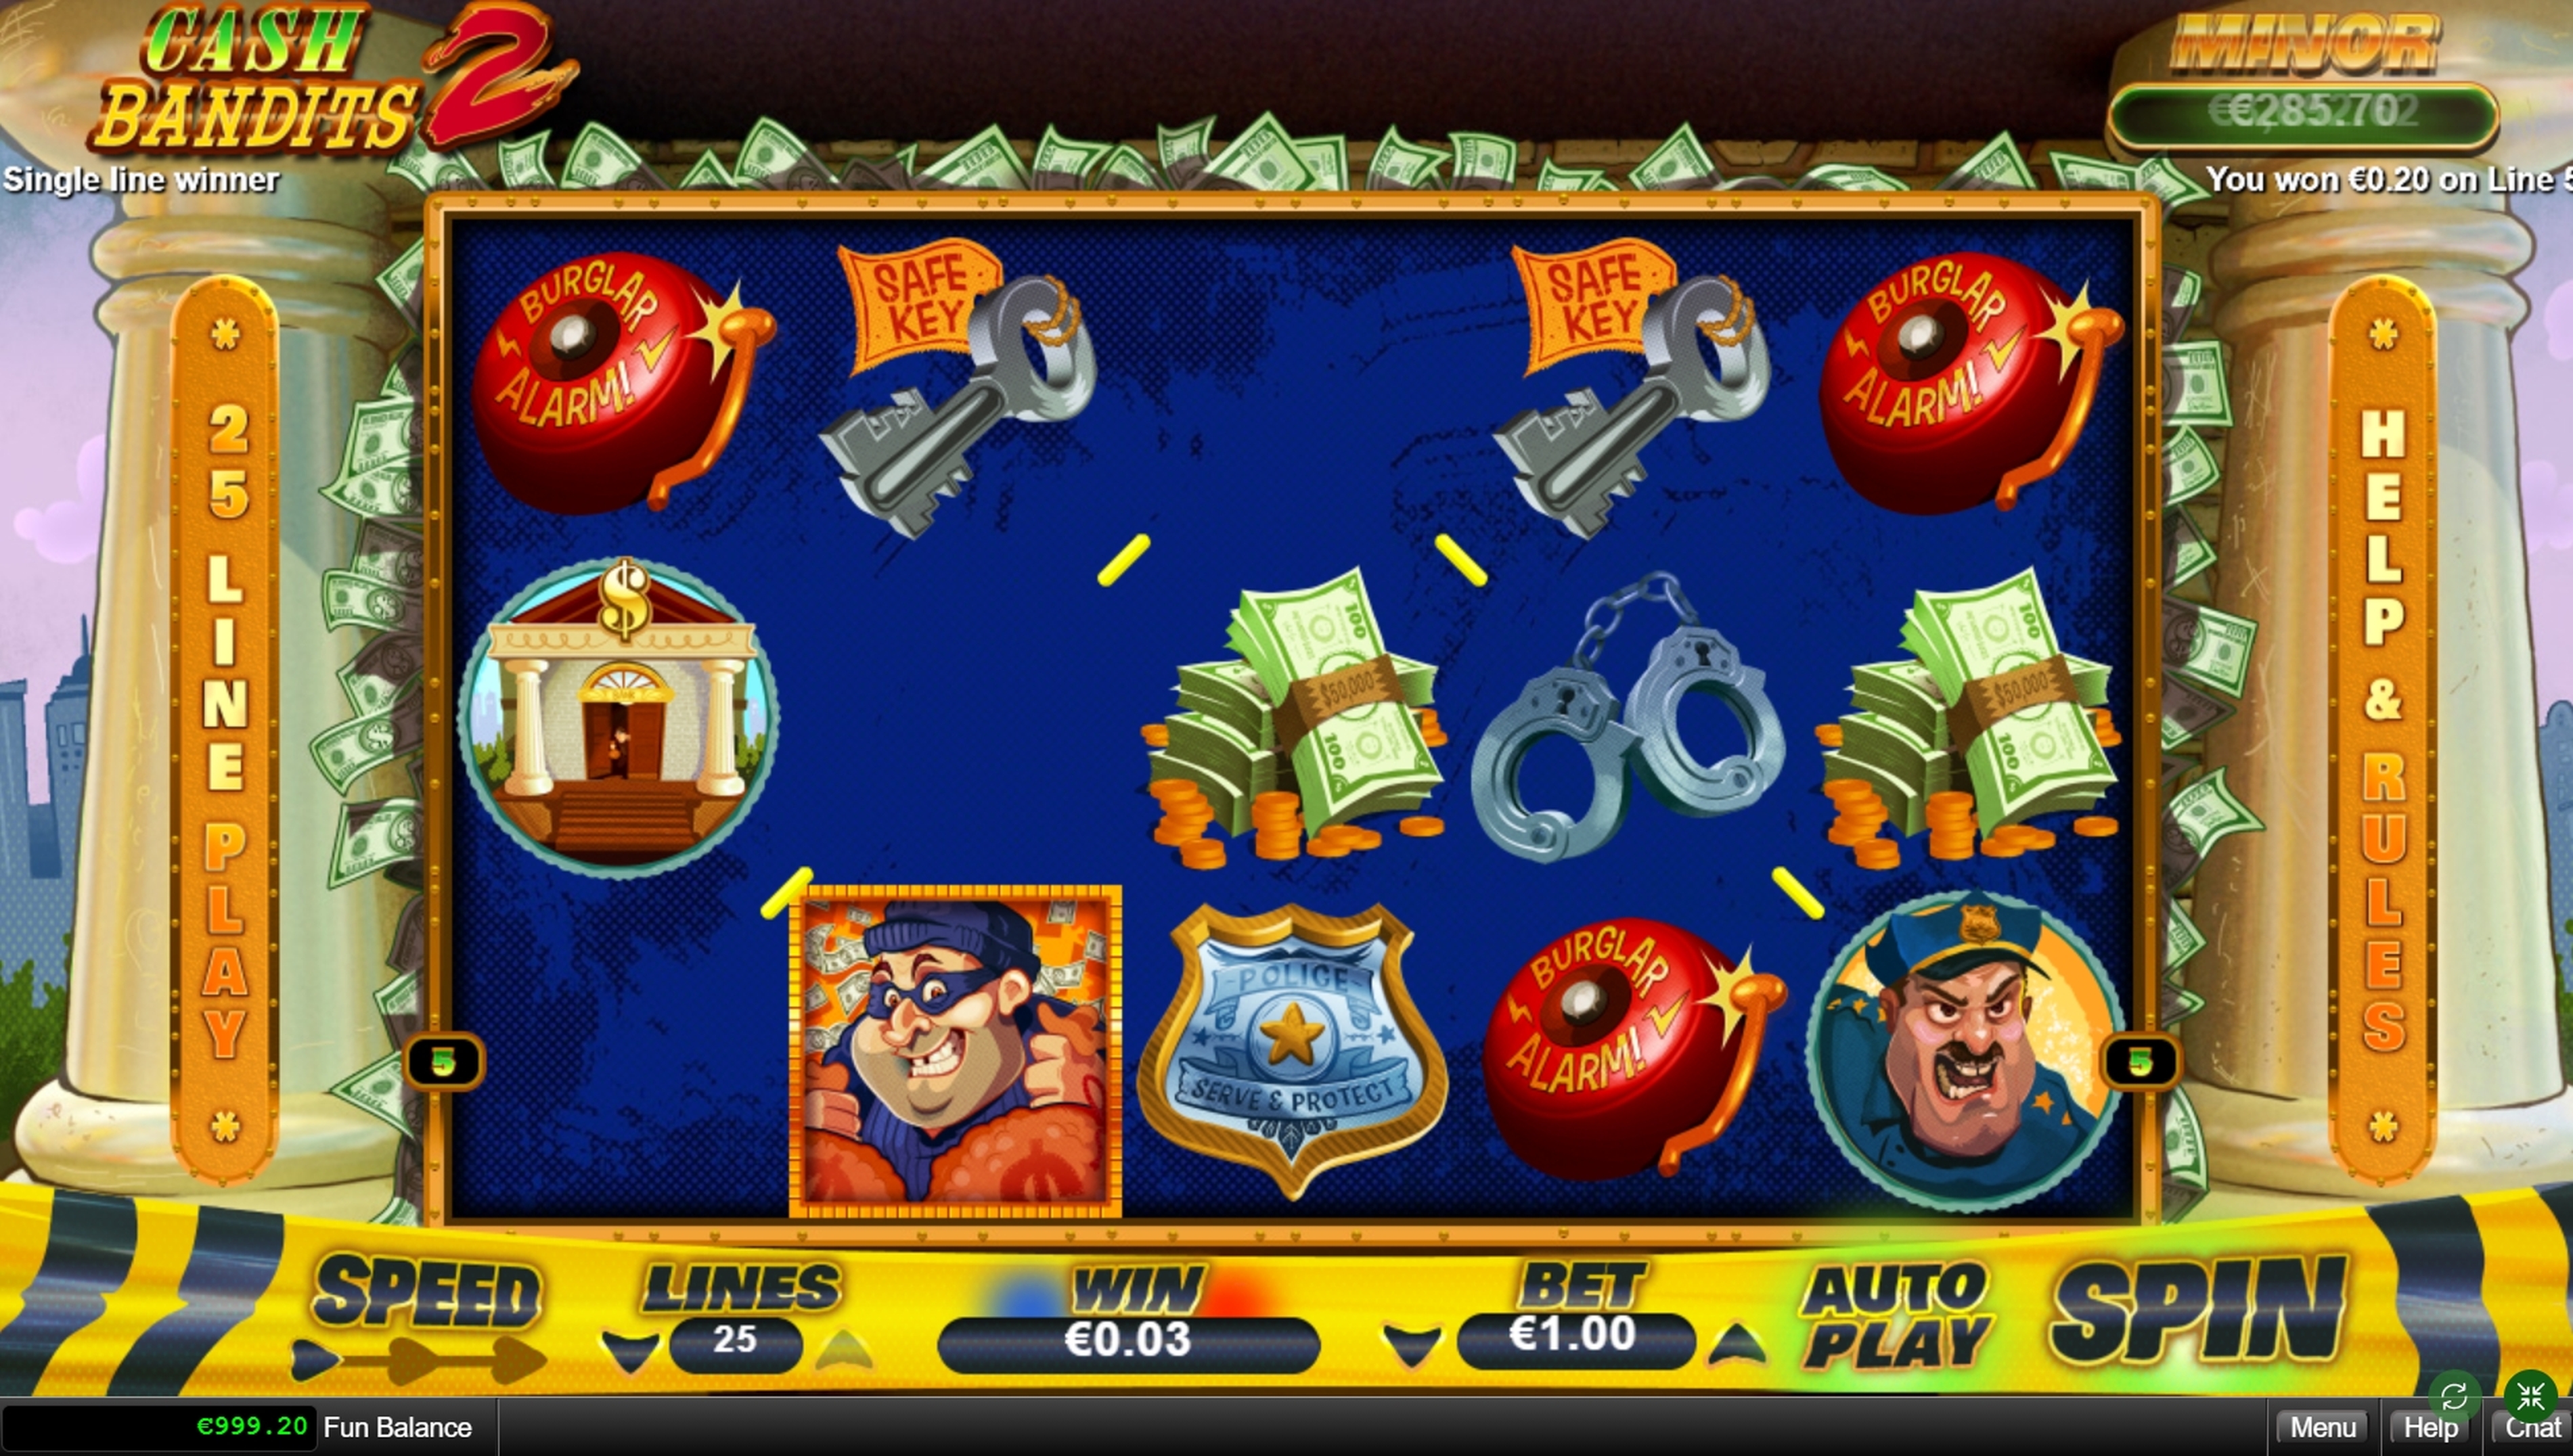 Win Money in Cash Bandits 2 Free Slot Game by Real Time Gaming